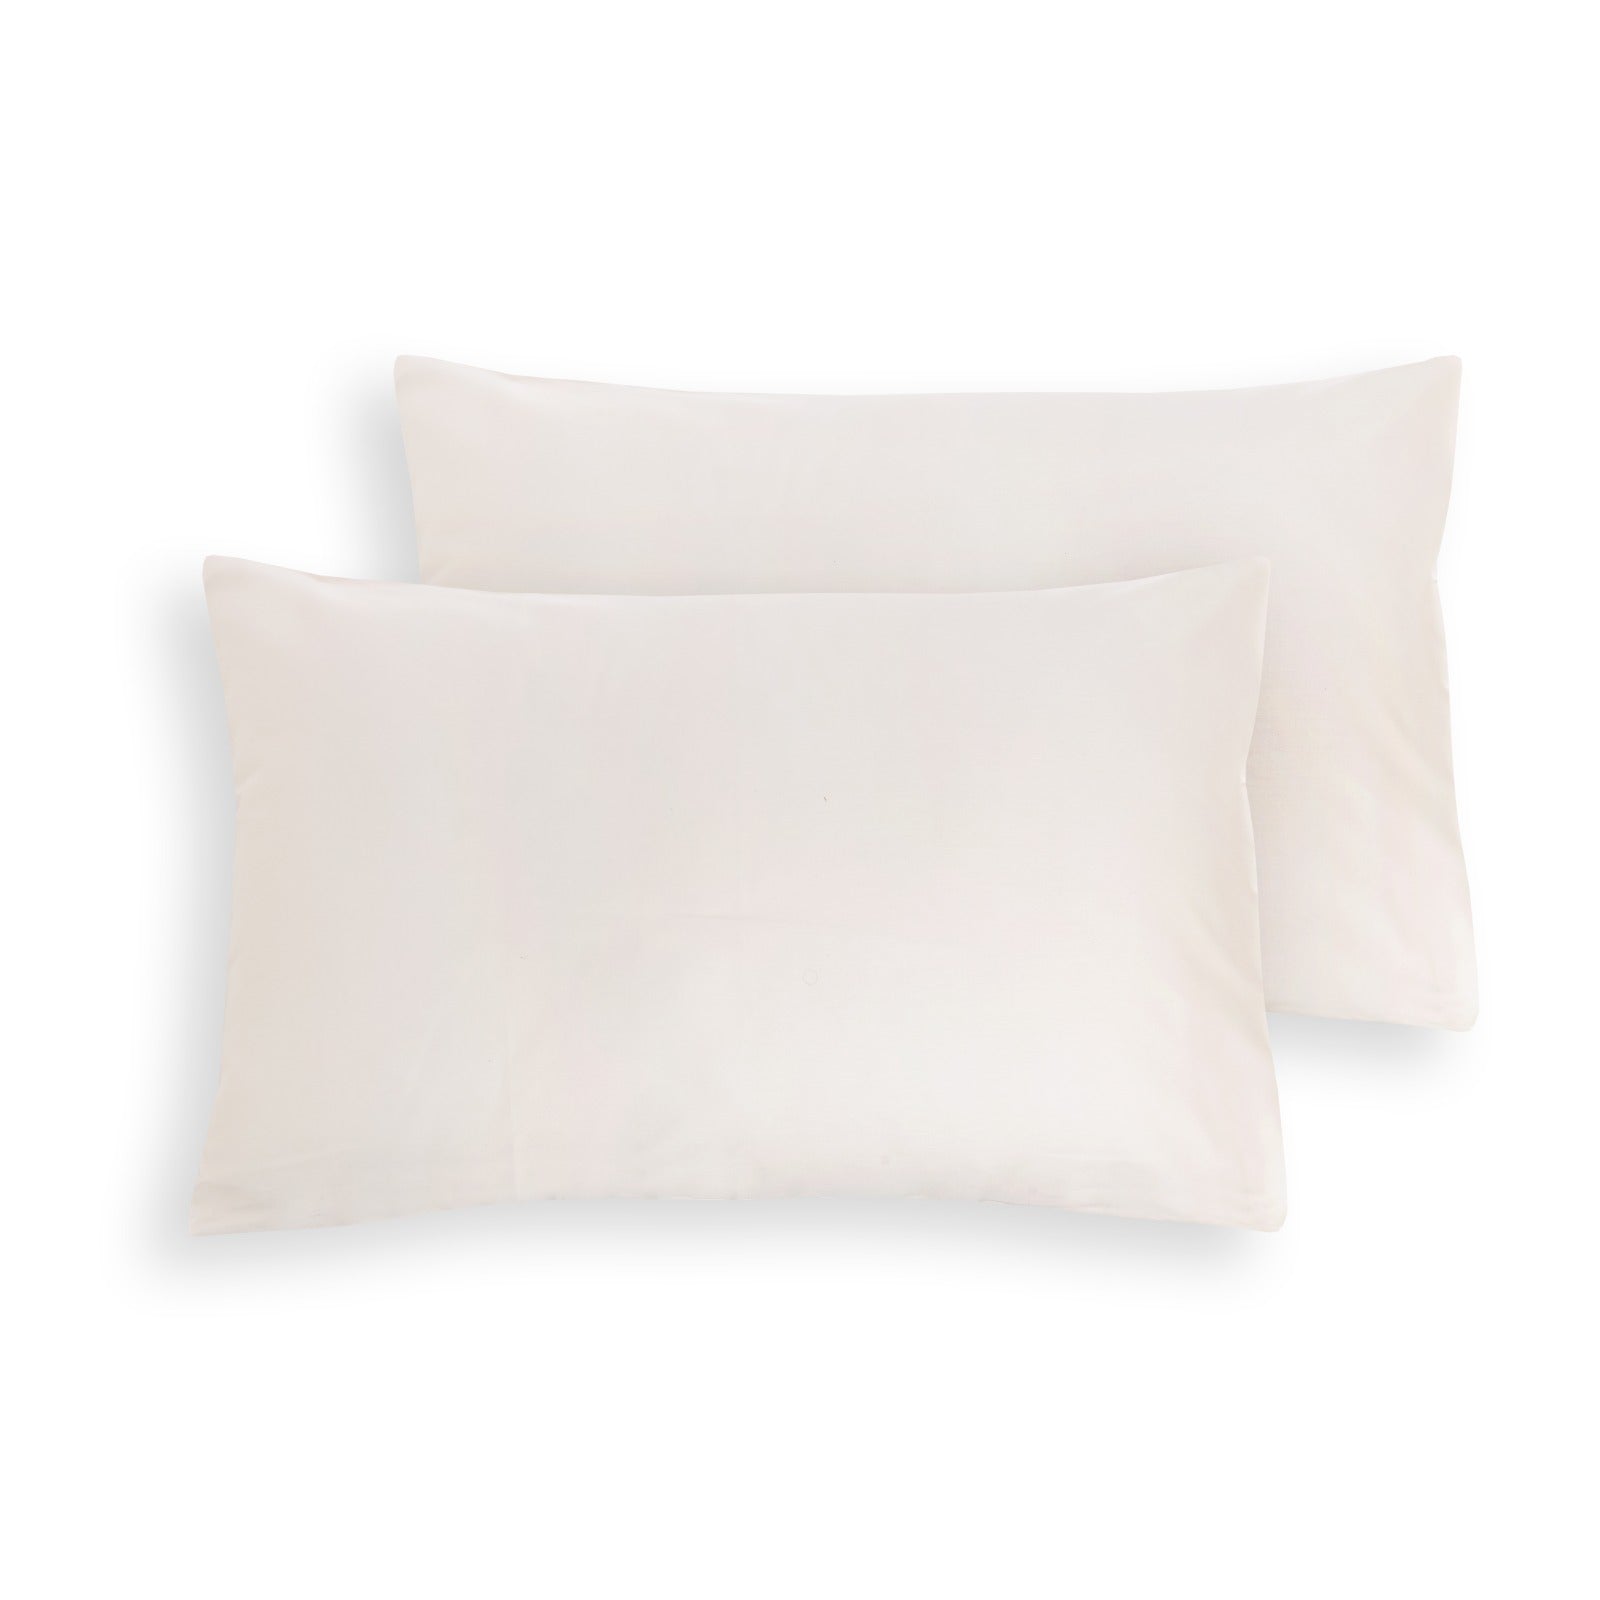 Heather &amp; Ferne 300 Thread Count 100% Cotton Housewife Pillowcase - Cream 1 Shaws Department Stores